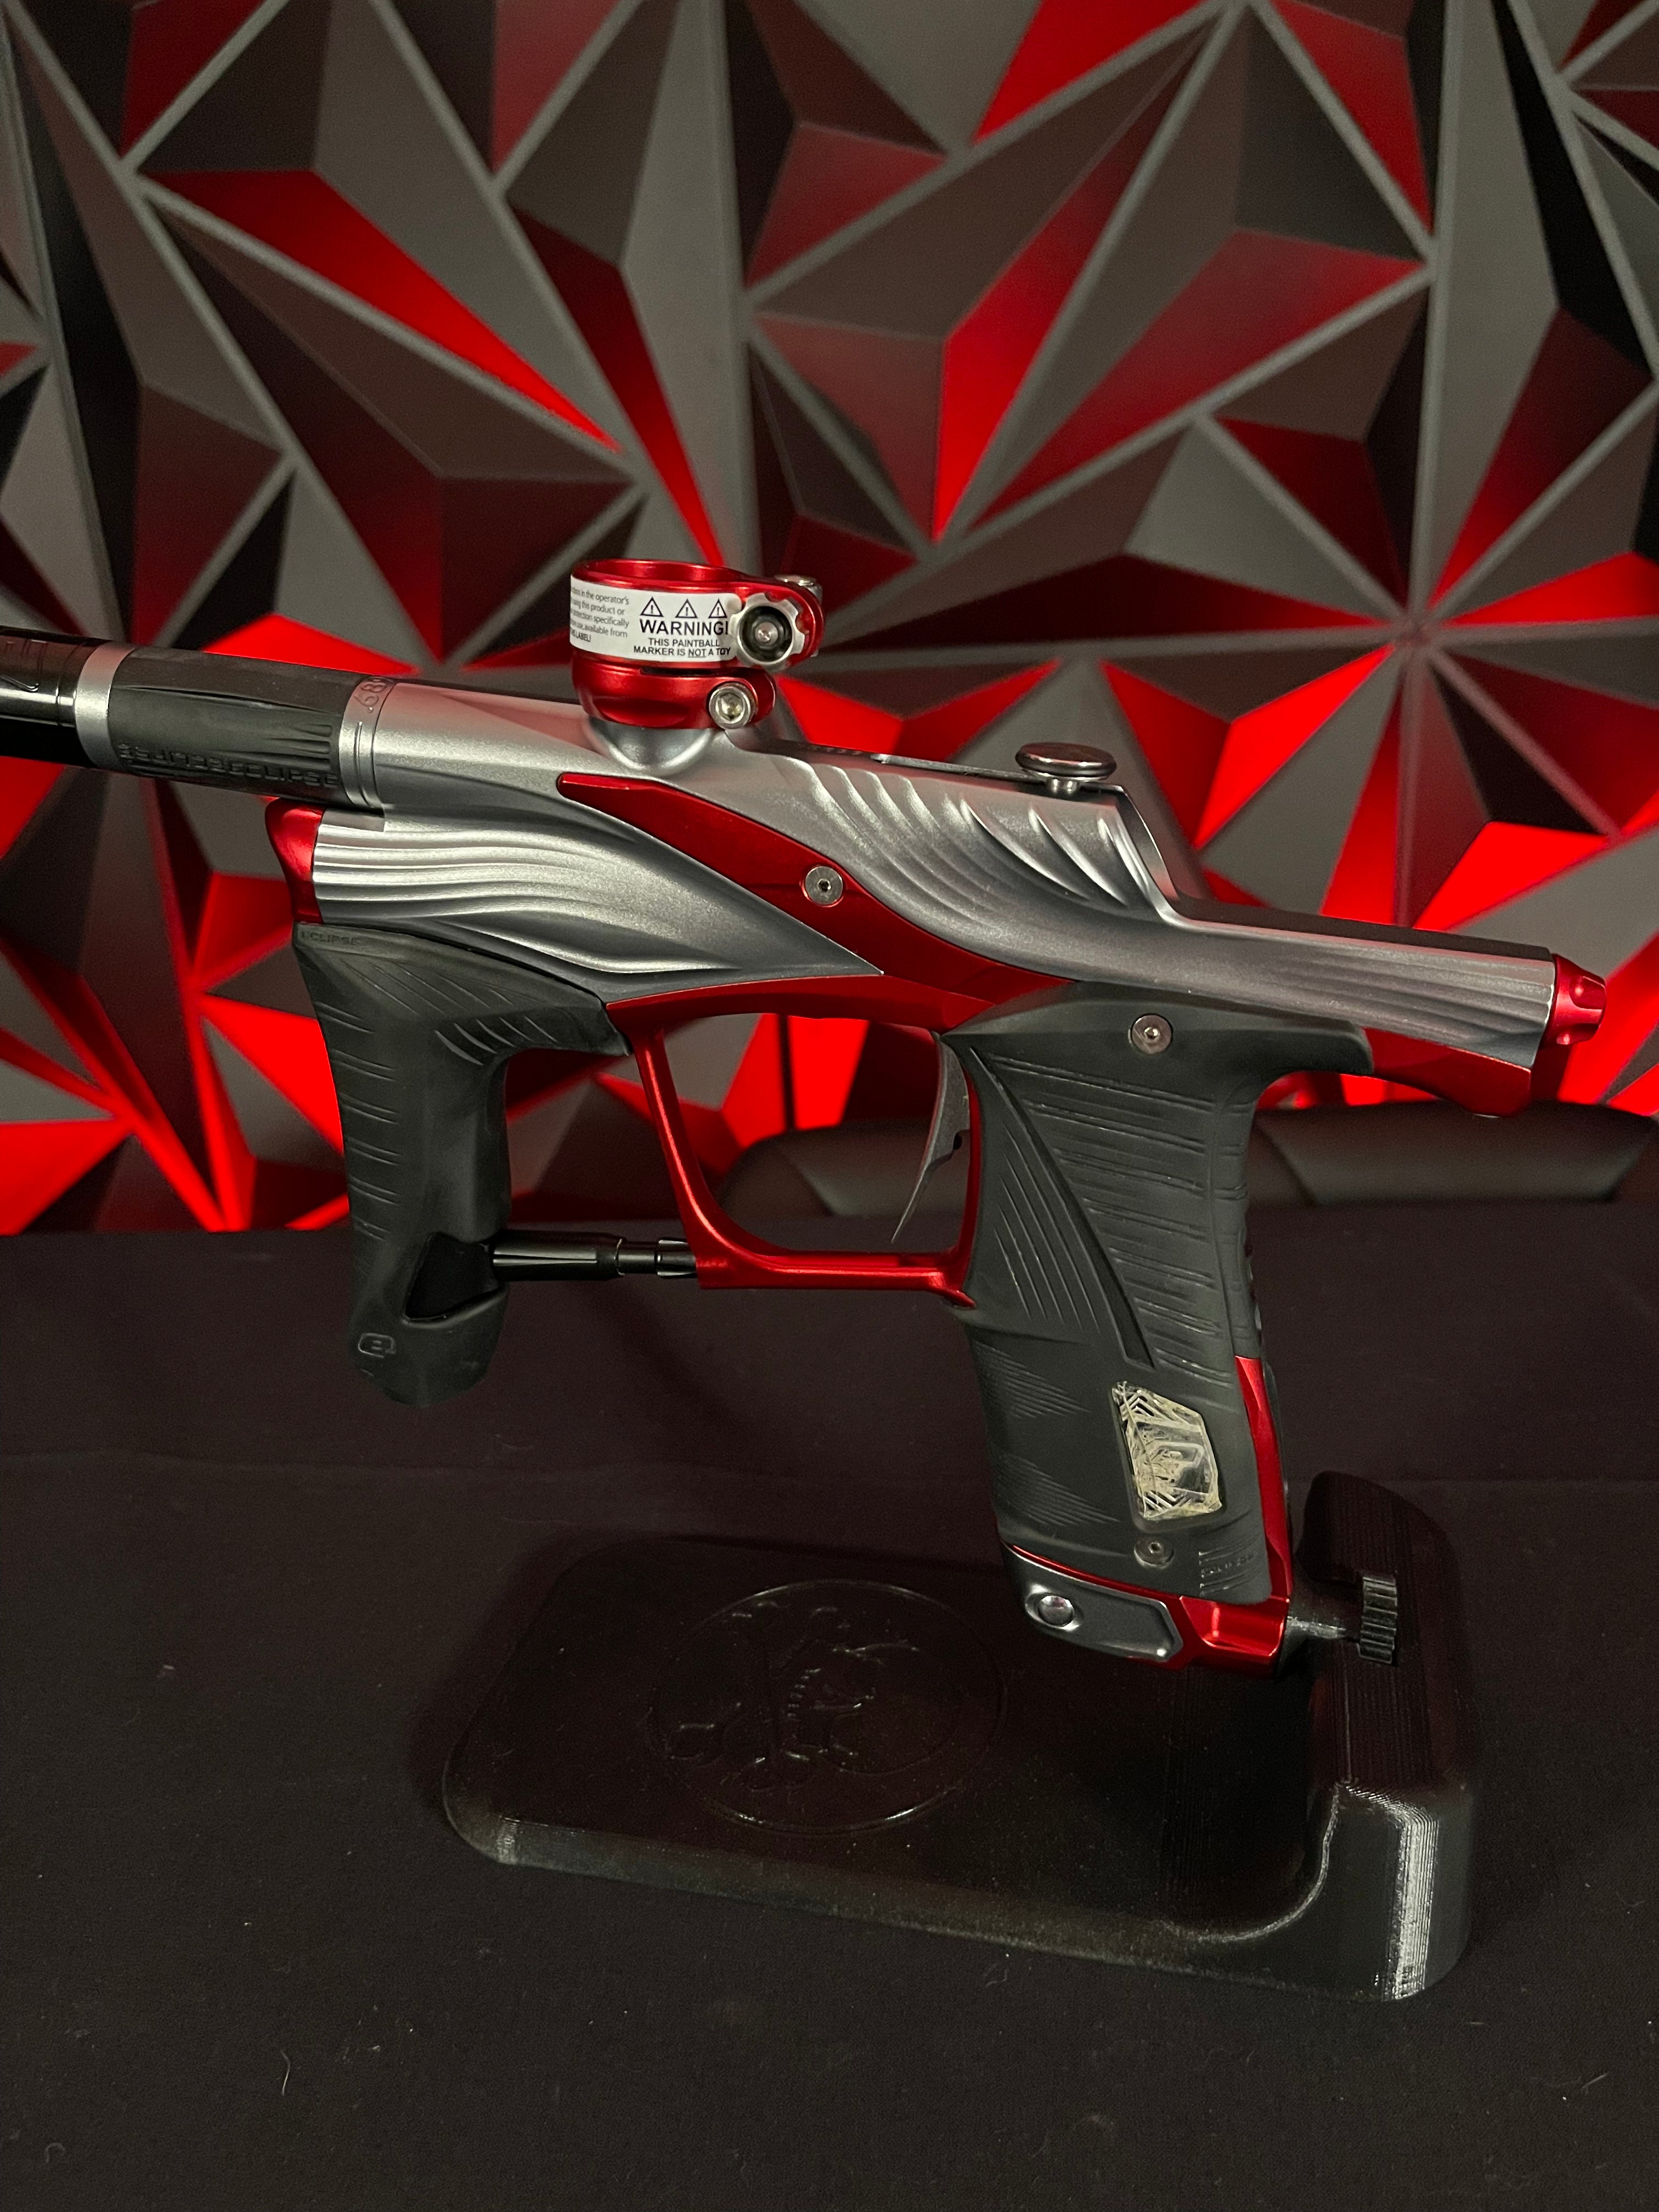 Used Planet Eclipse LV1.6 Paintball Gun - Silver / Red w/ Red and